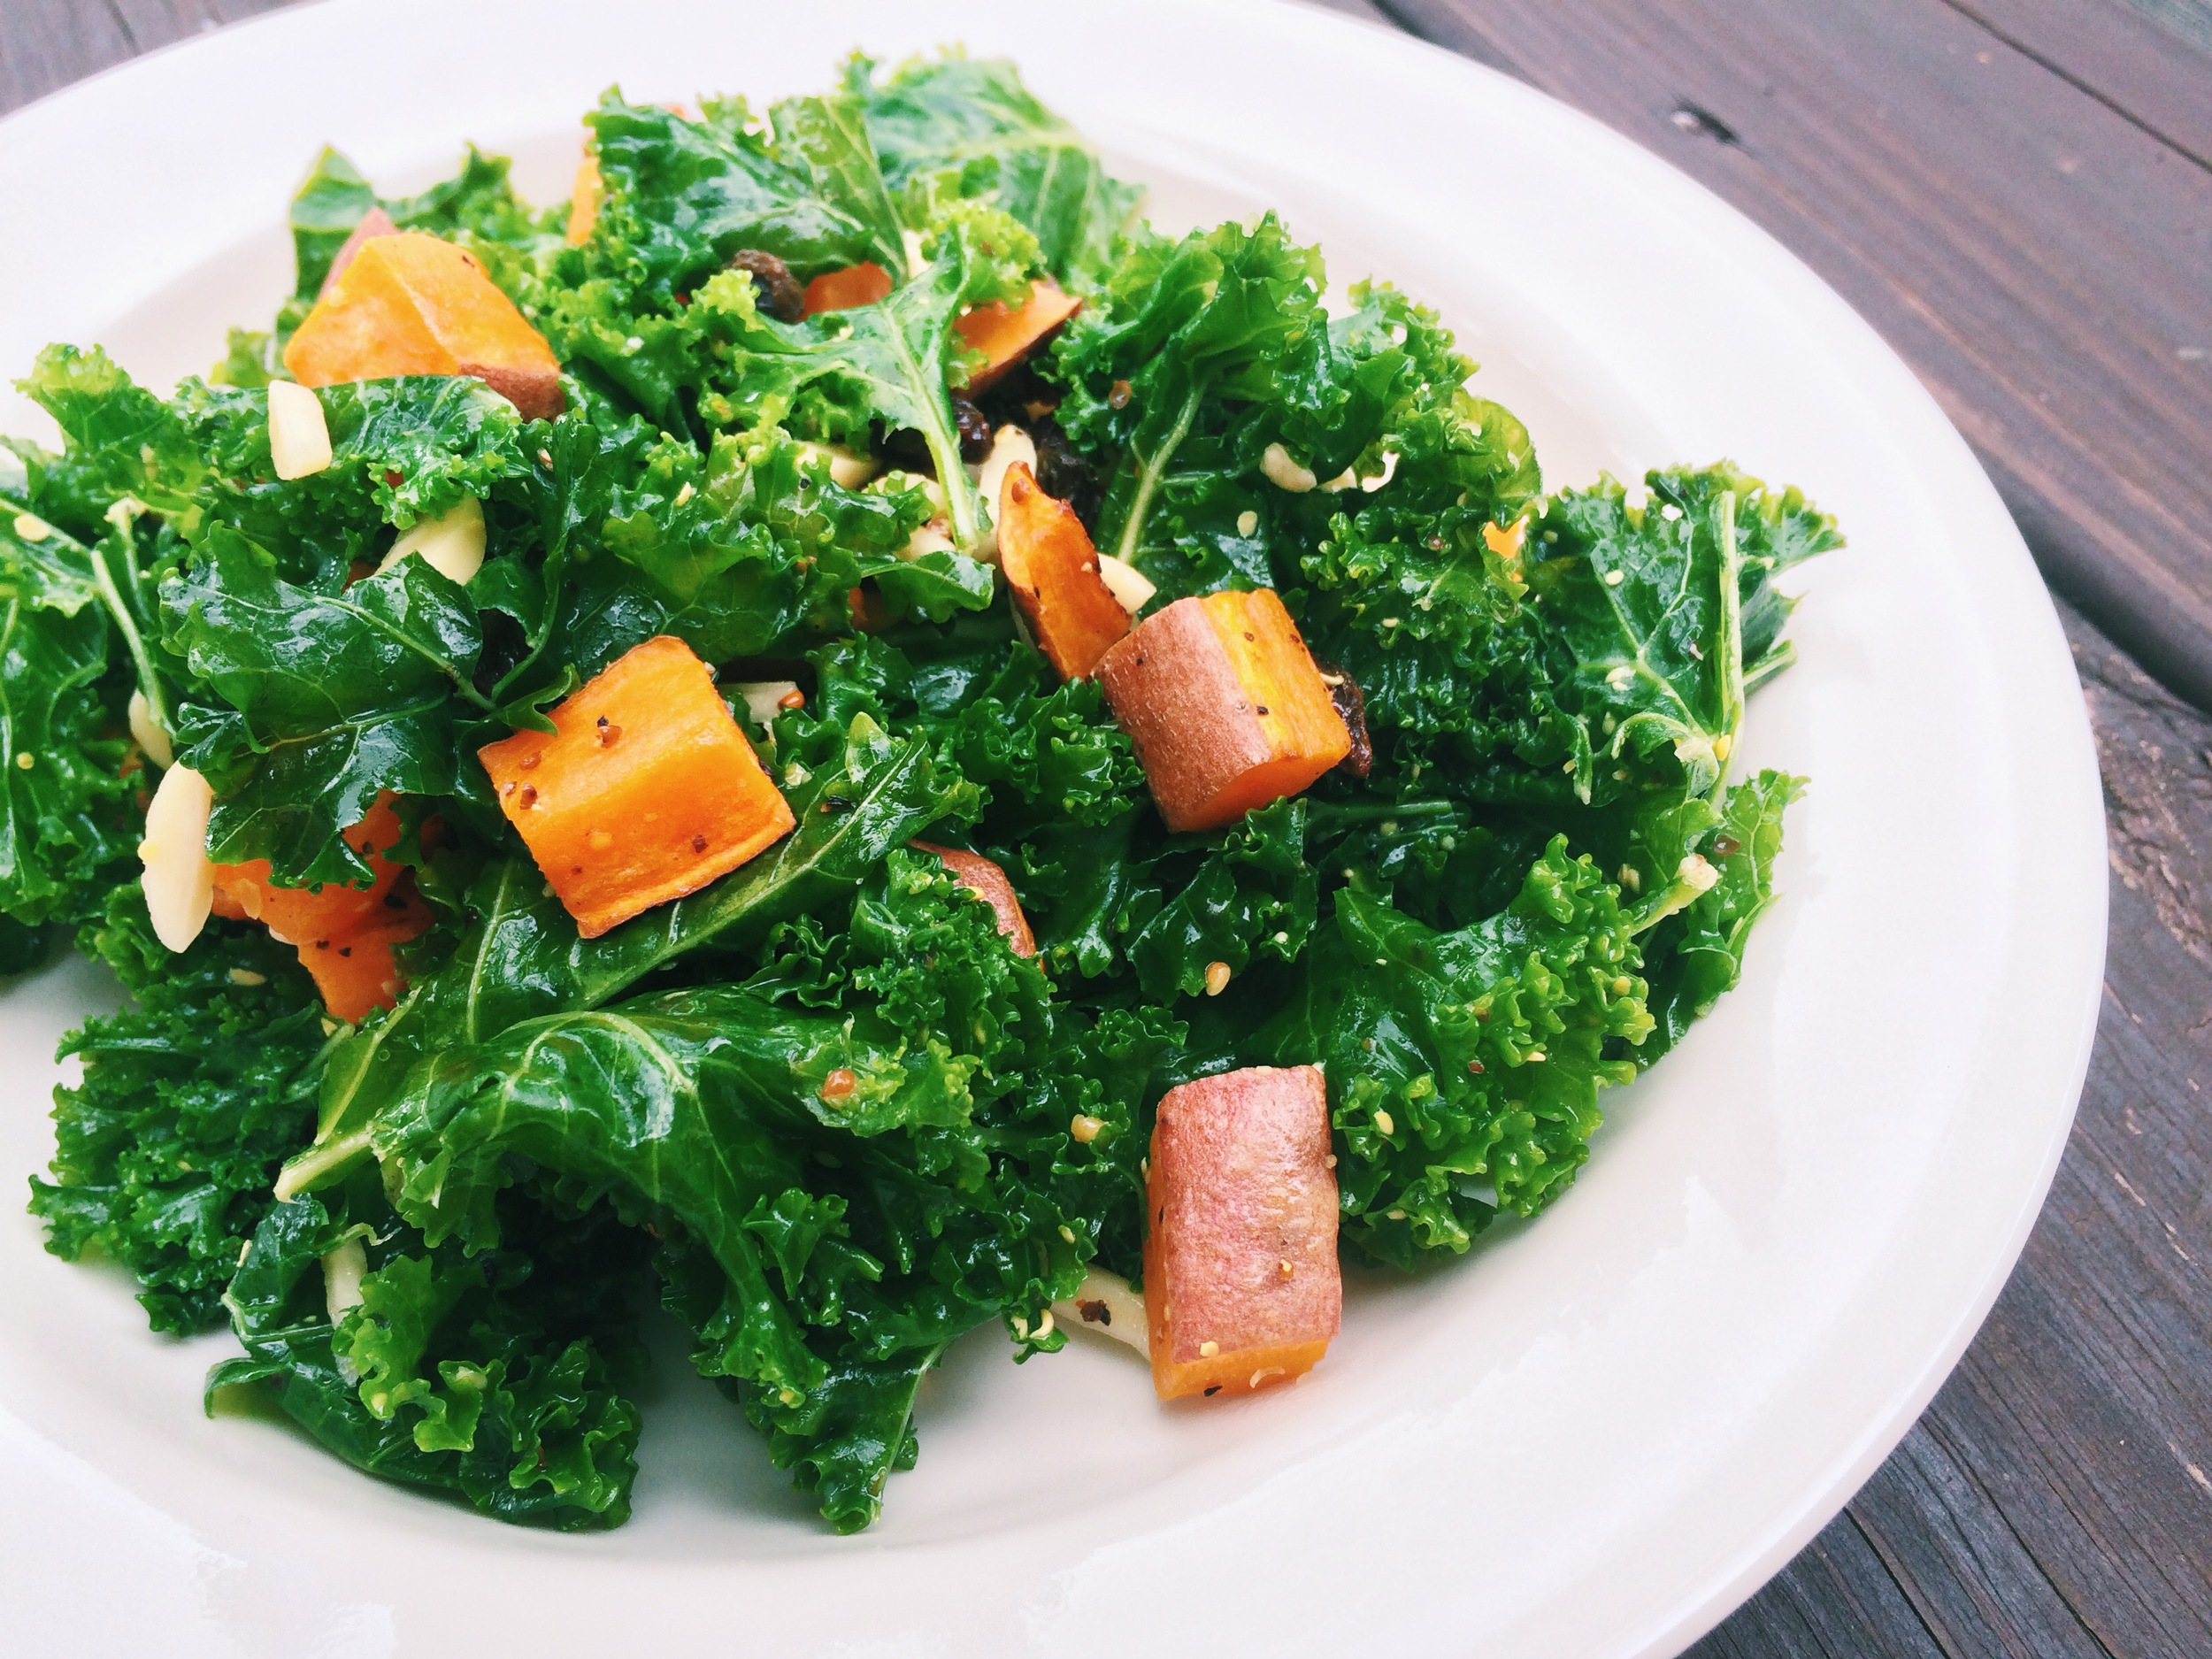 Kale Roasted Sweet Potato Salad With Raisins Almonds Maria Makes Wholesome Simple Recipes For Every Day